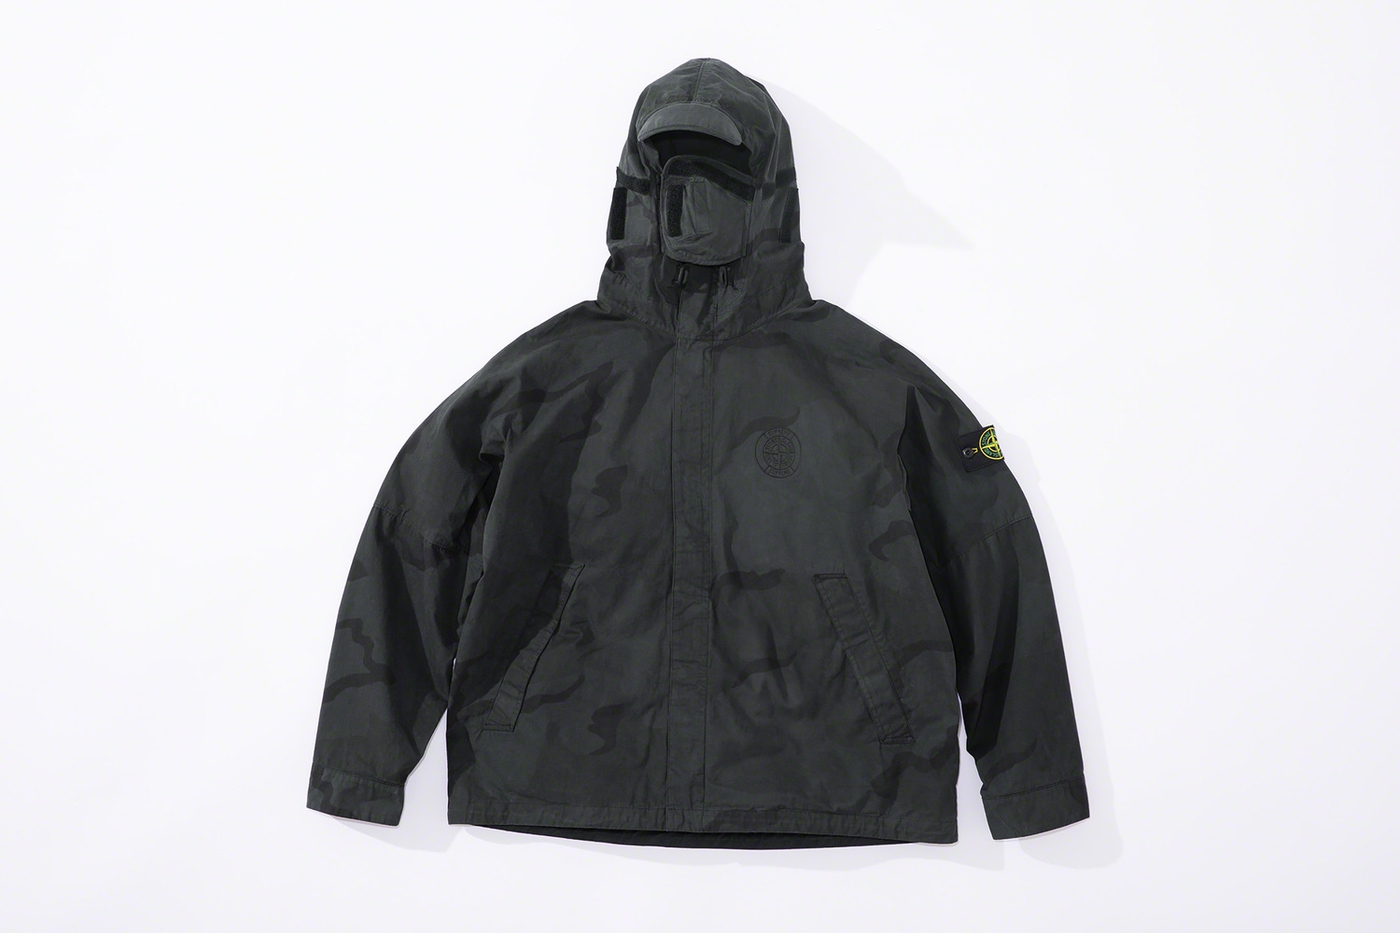 Water resistant brushed cotton canvas with printed pattern and pigment overdye. Fixed hood with rigid visor and velcro side flaps. (21/47)